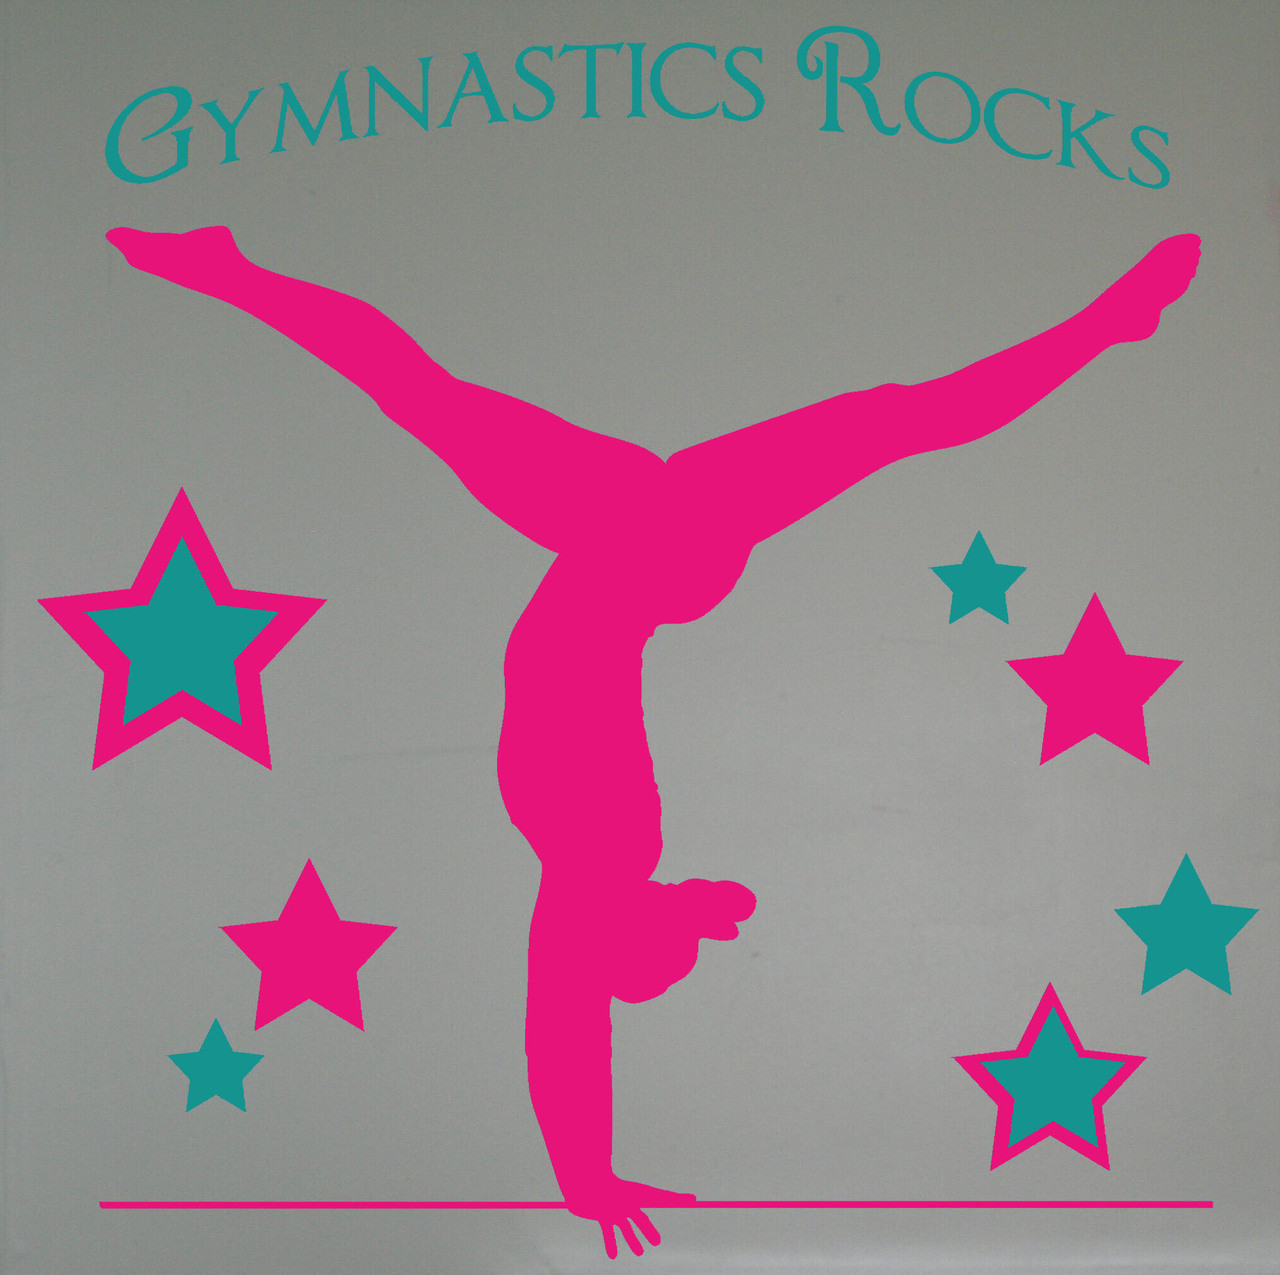 Balancing Gymnast Silhouette and Stars with Gymnastics Rocks Girls Wall  Stickers Decals